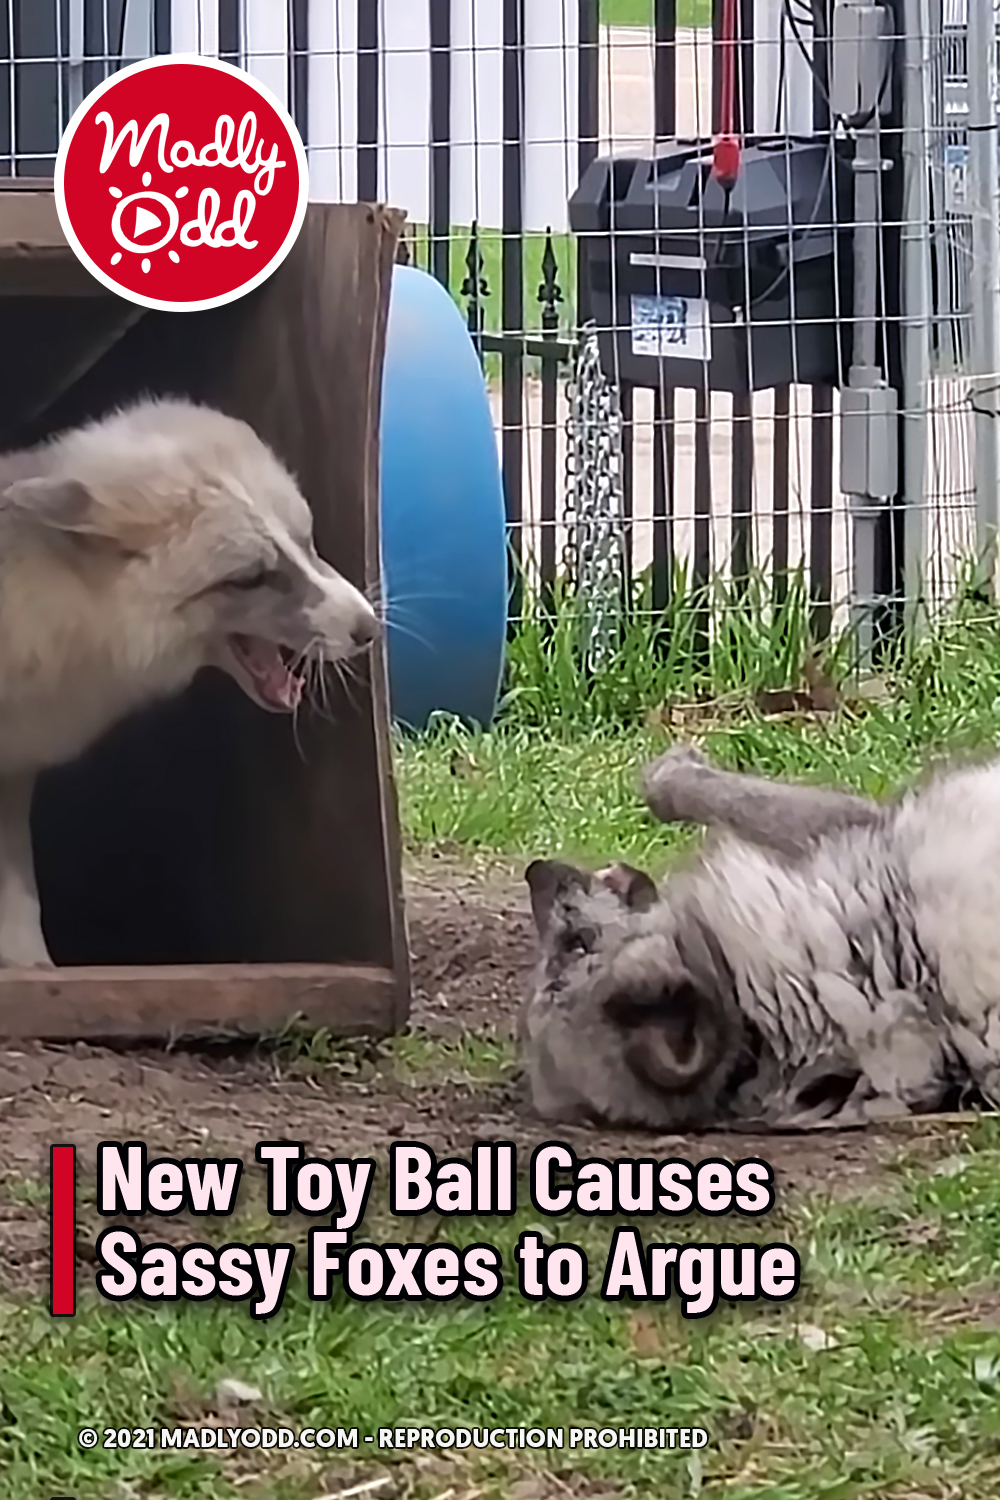 New Toy Ball Causes Sassy Foxes to Argue